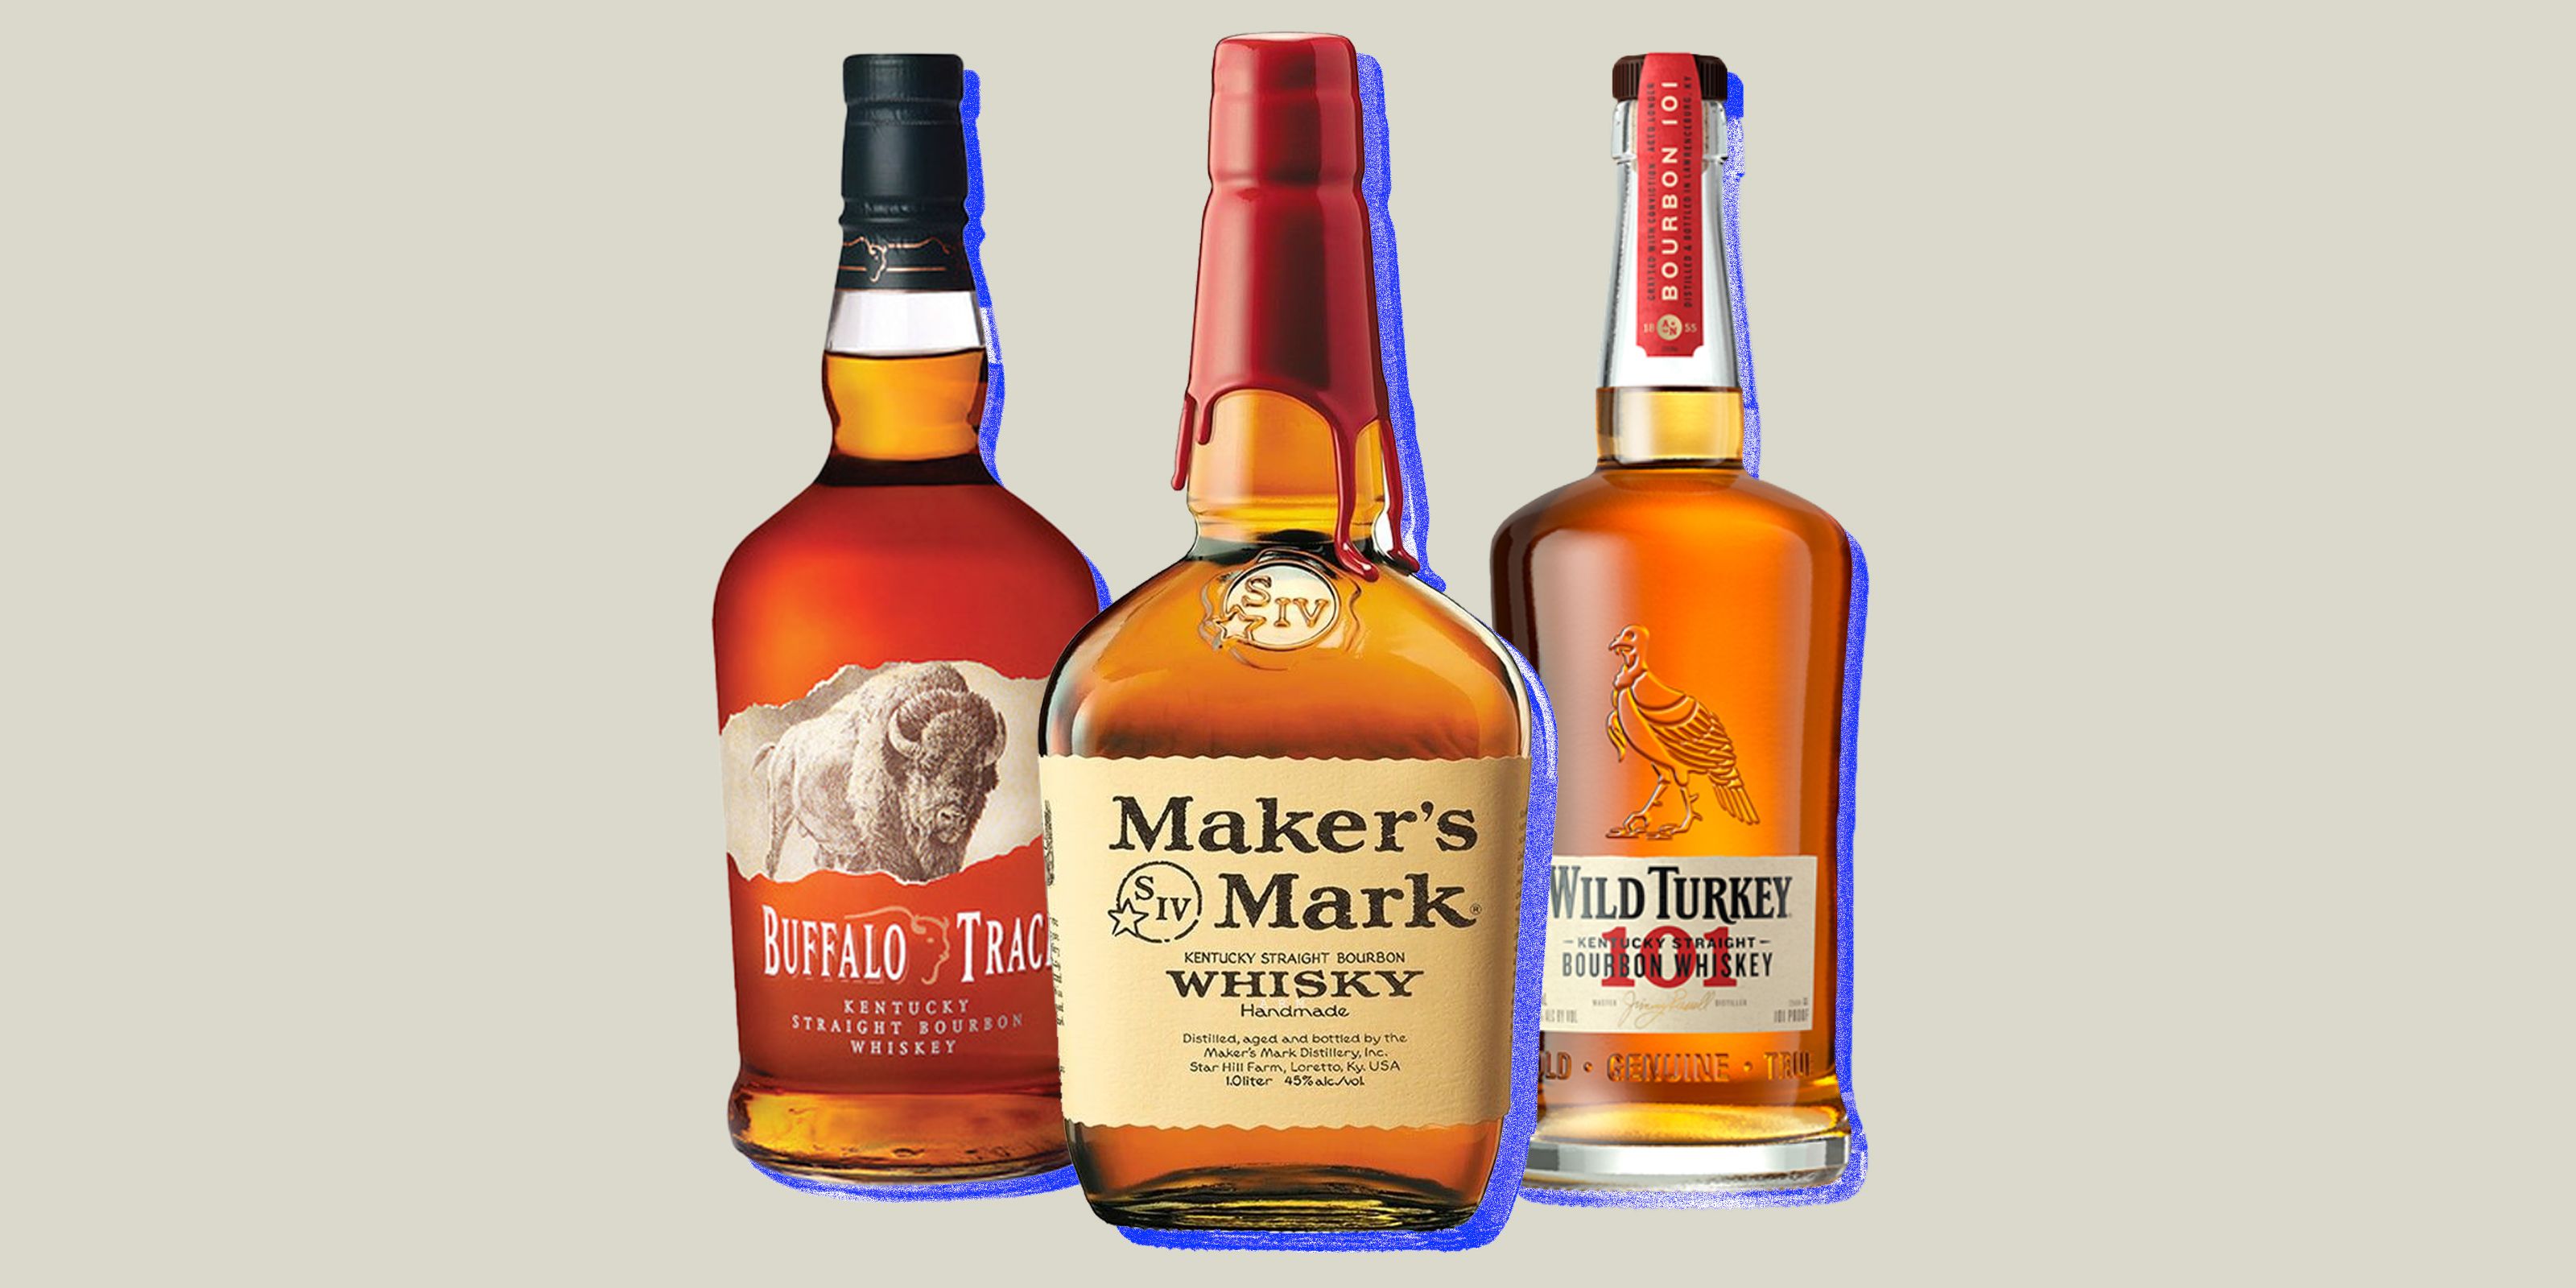 Bottle Avenue - Here are the four best Whisky mixers that will make your  drink have more taste. Which one is your favorite to mix into whisky? Let  us know on the